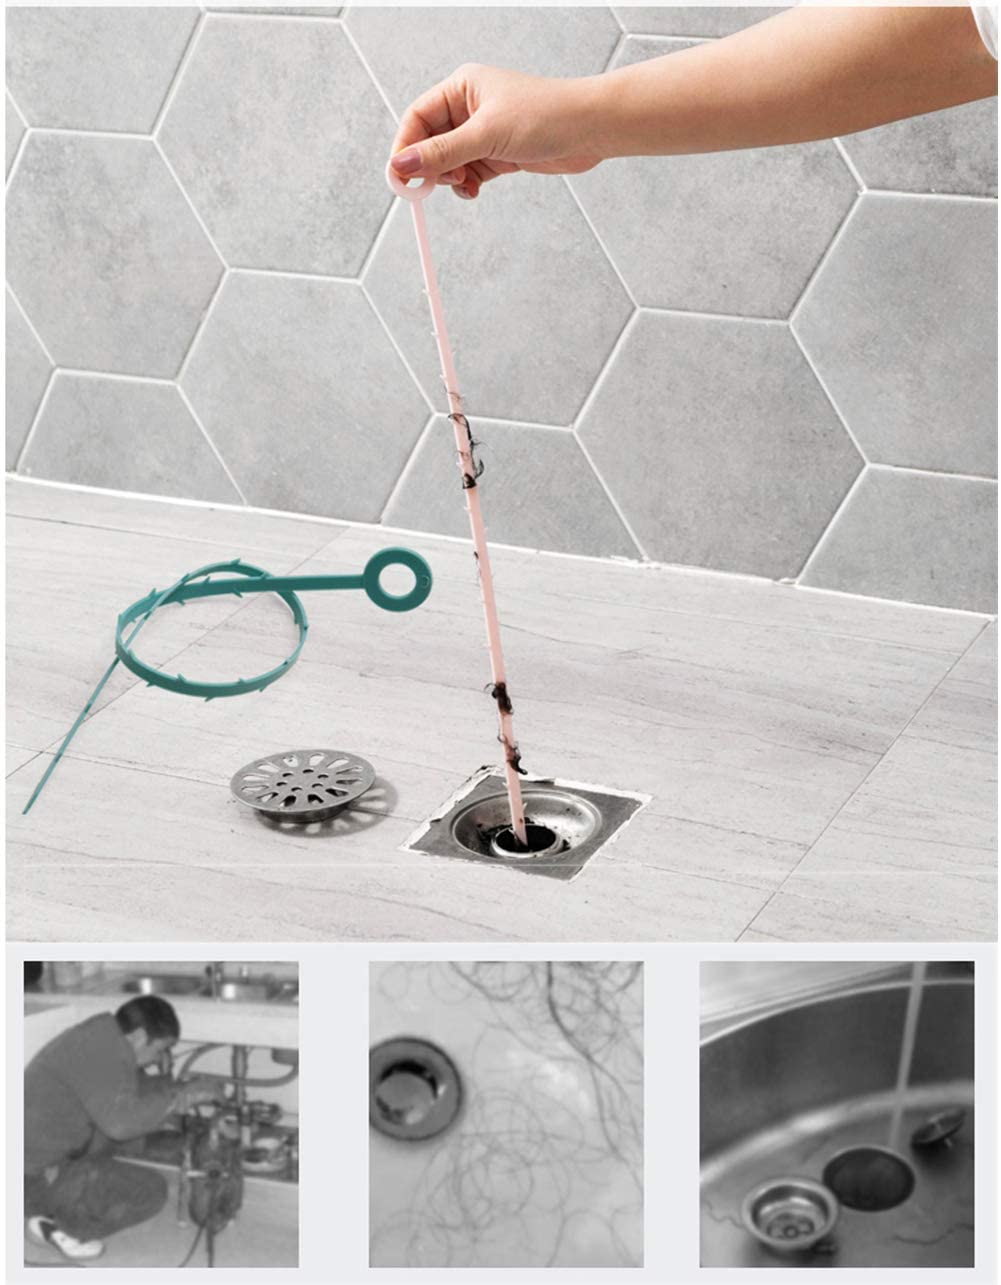 Auxsoul 6 in 1 Drain Snake Cleaner Drain Hair Remover Sink Dredge Drain Clog Remover Cleaning Tools for Kitchen Sink Bathroom Tub Toilet Clogged Drains Dredge Pipe Sewers 